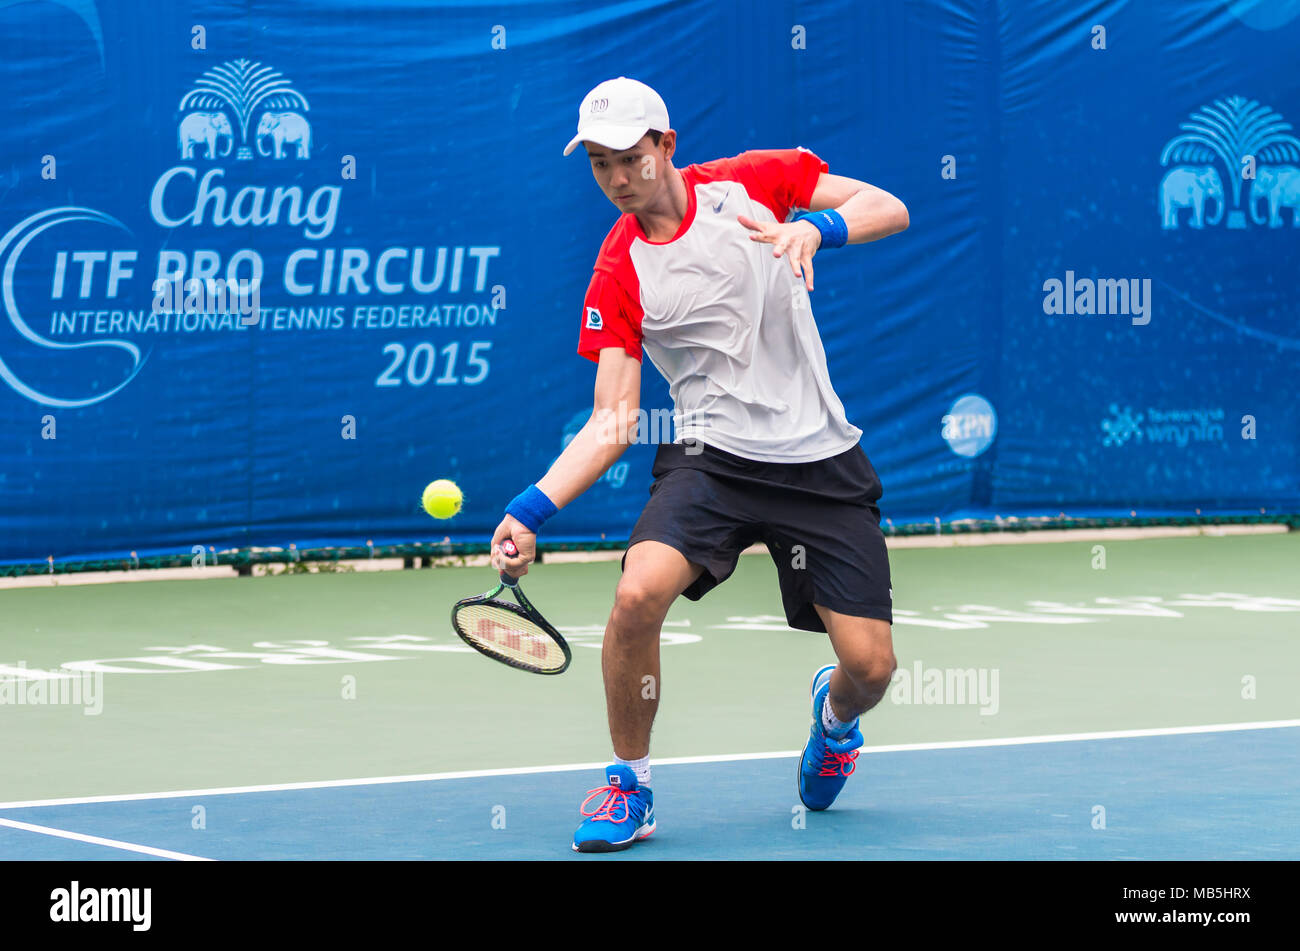 Itf Pro Circuit Tennis Tour High Resolution Stock Photography and Images -  Alamy